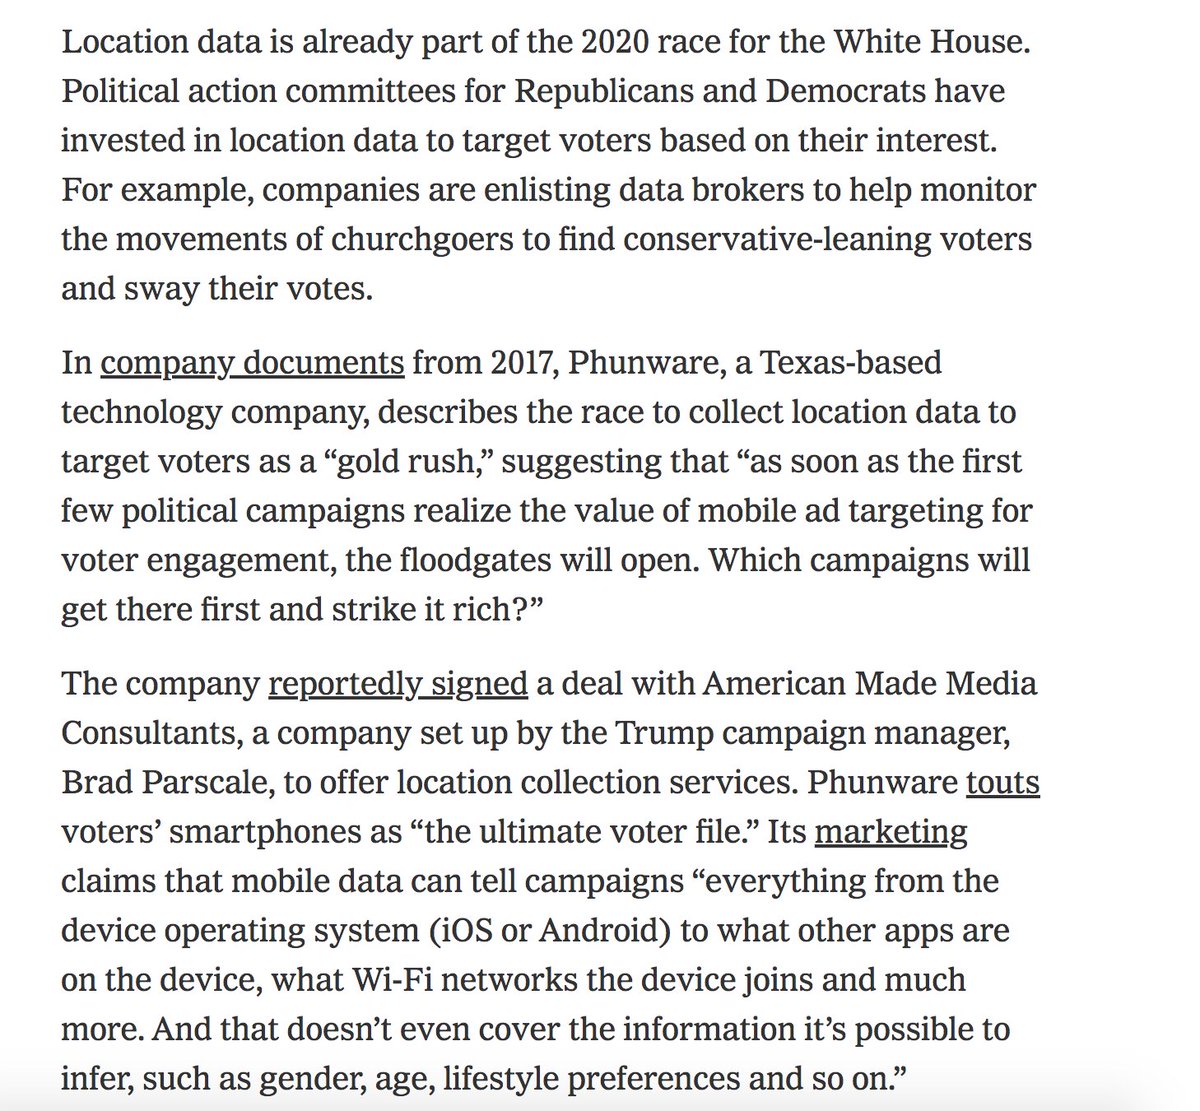 It's easy to see how this could get very grim. This location data is out there...it's bought/sold/traded to marketers. Political campaigns are some of the biggest marketers out there. They're hiring companies that collect this kind of data. Once they have it, they have it.